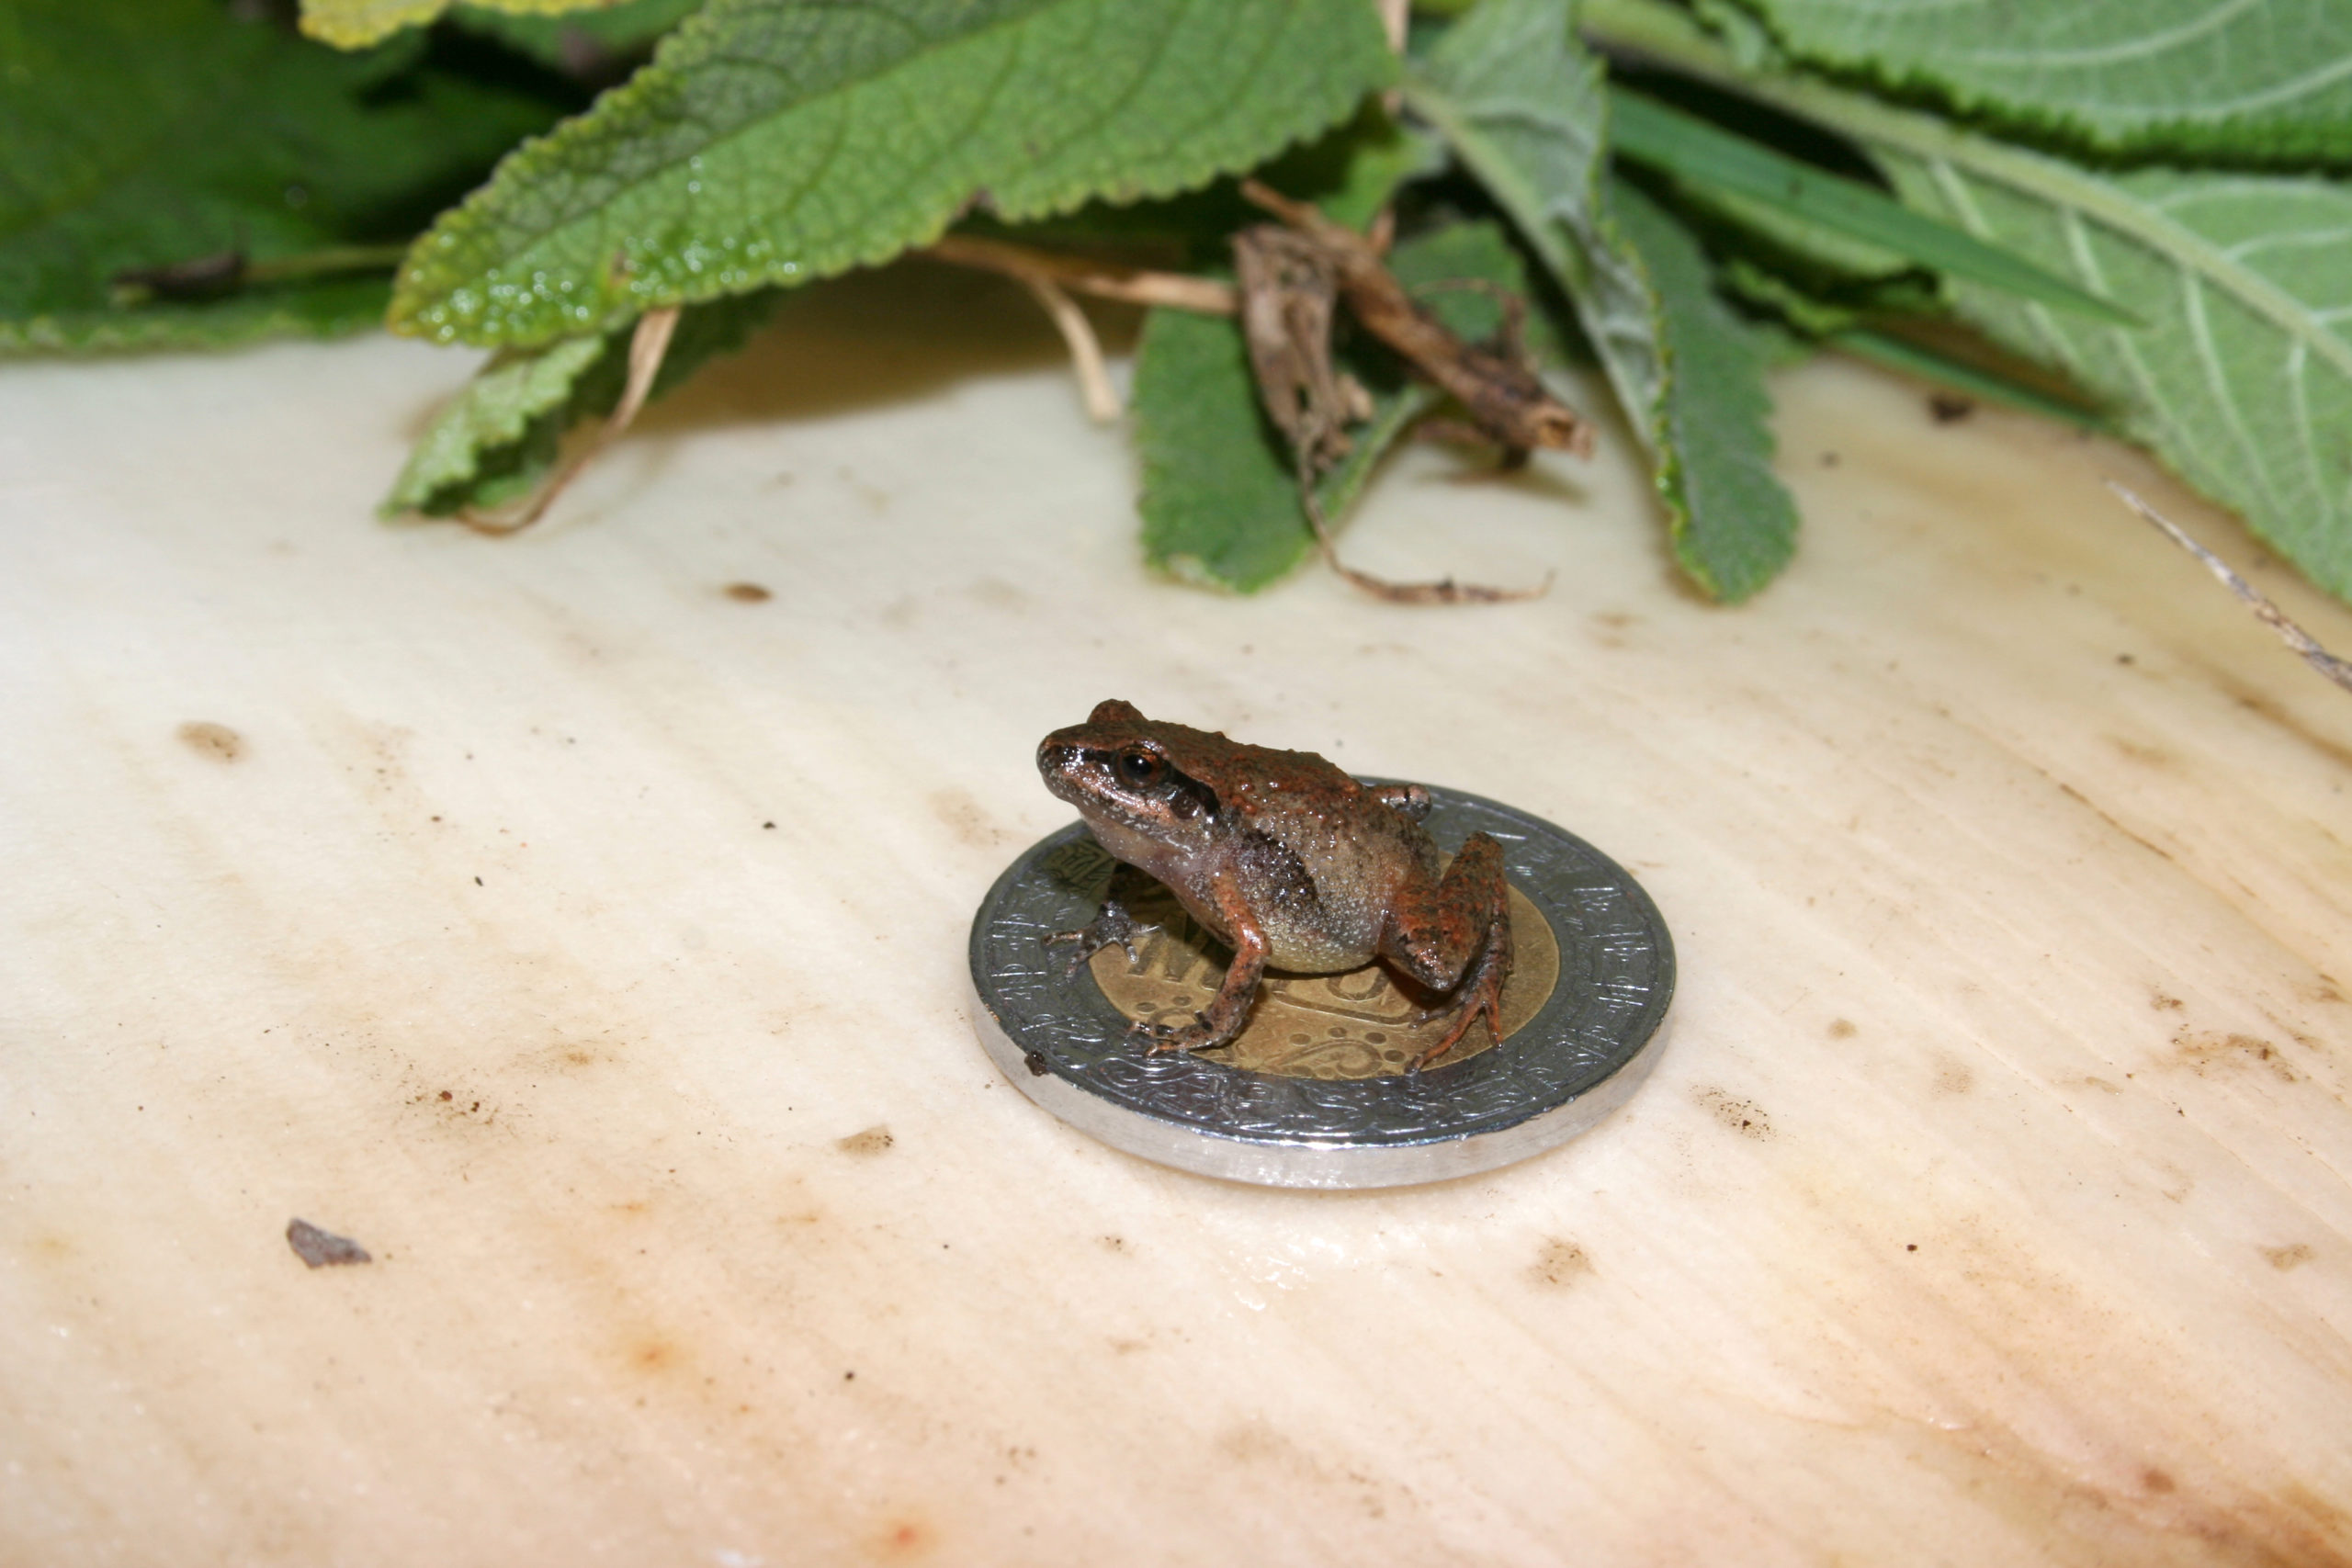 Finding Mini Frogs: These Aren't Babies, They're Just Little